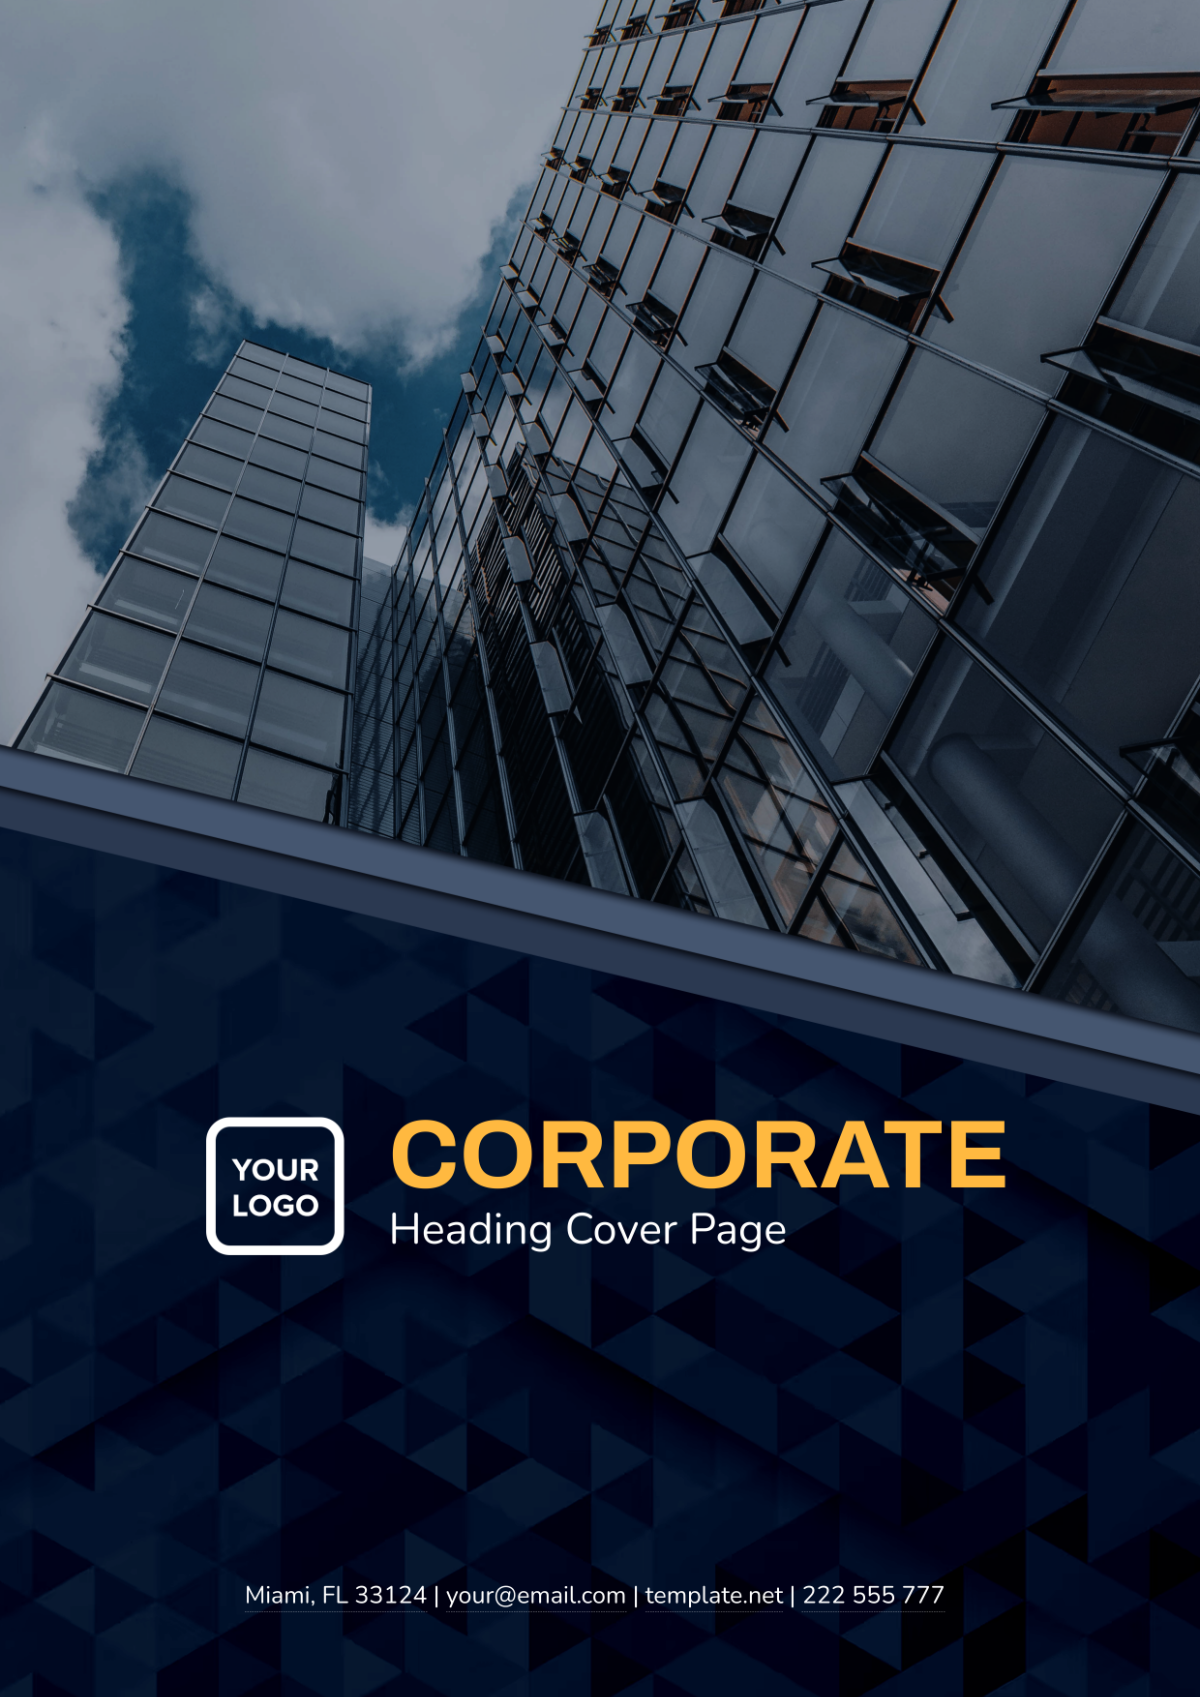 Corporate Heading Cover Page Template Edit Online And Download Example